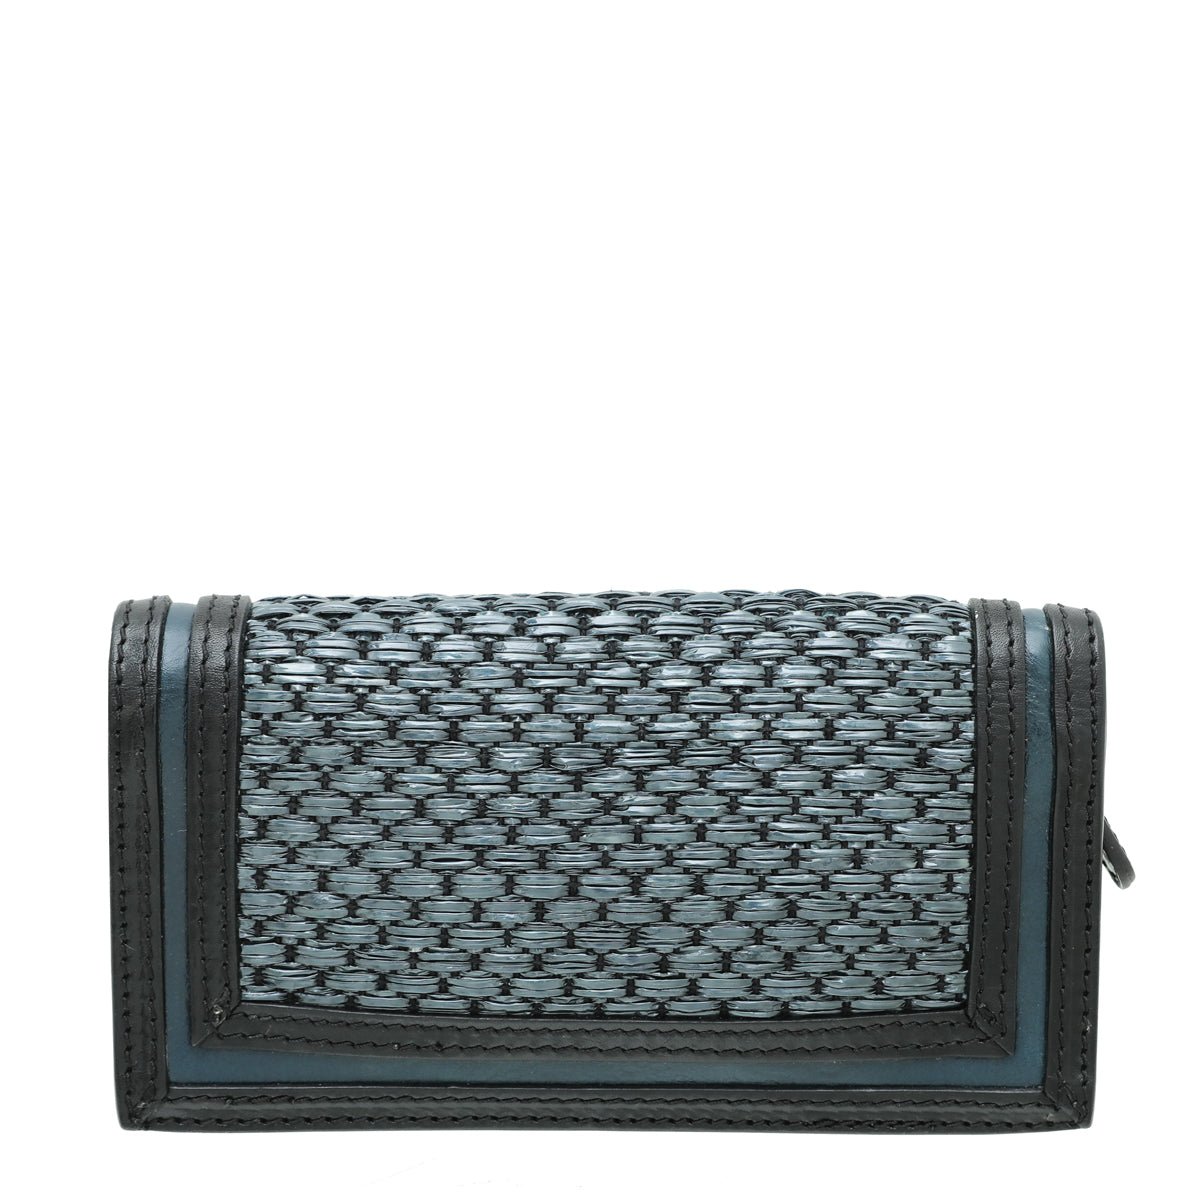 Burberry - Burberry Black Straw Woven Leather Clutch | The Closet